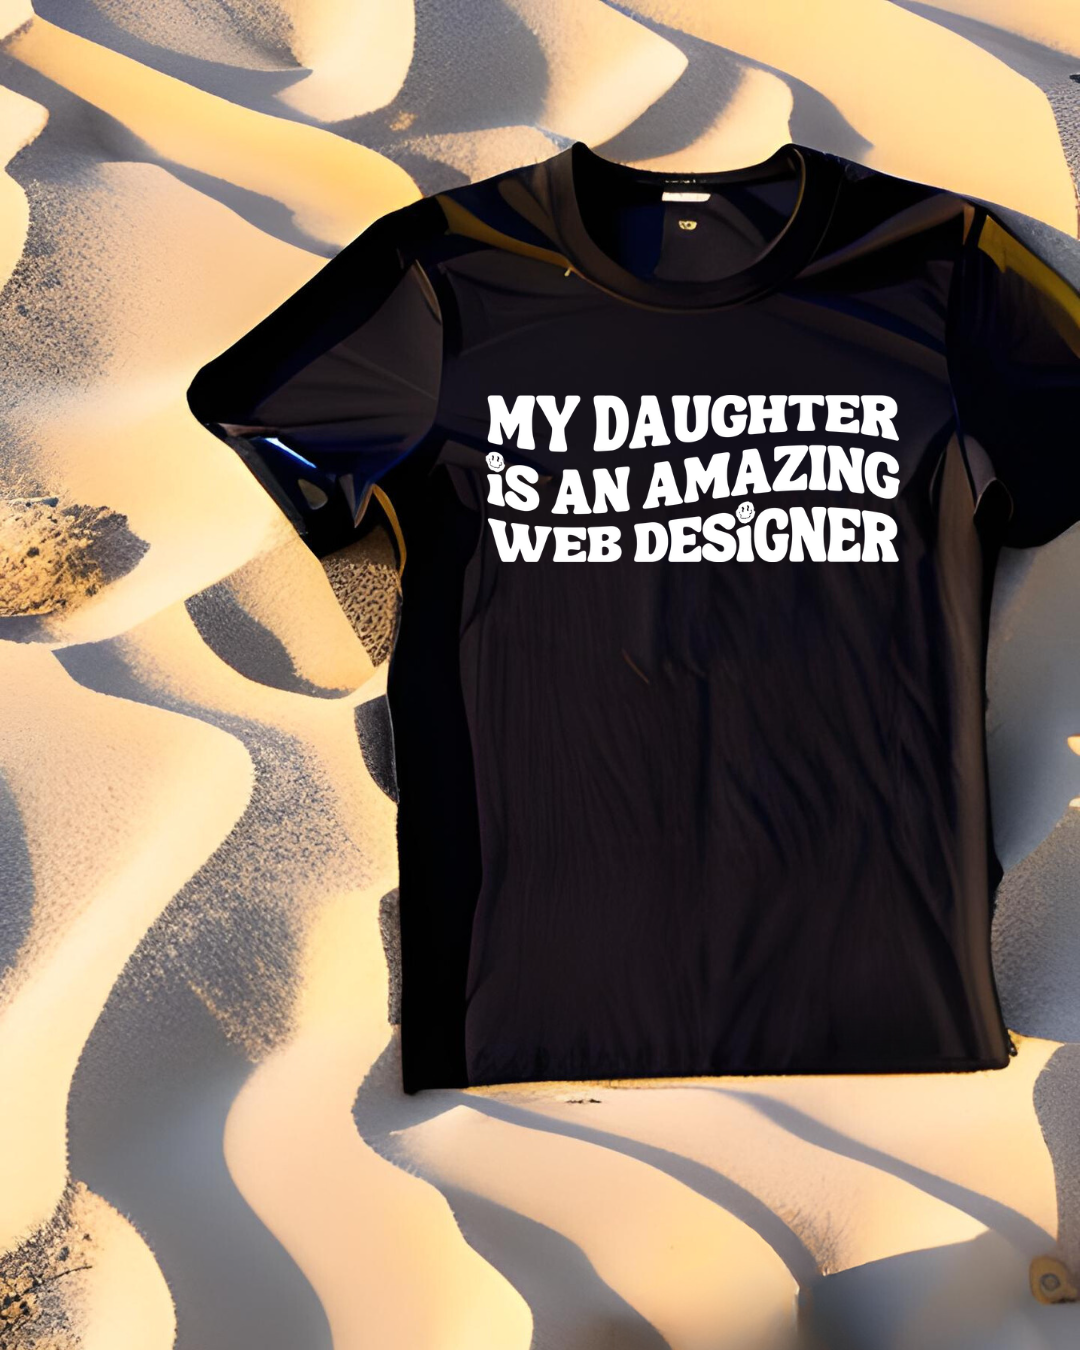 My Daughter is an Amazing Web Designer T-Shirt